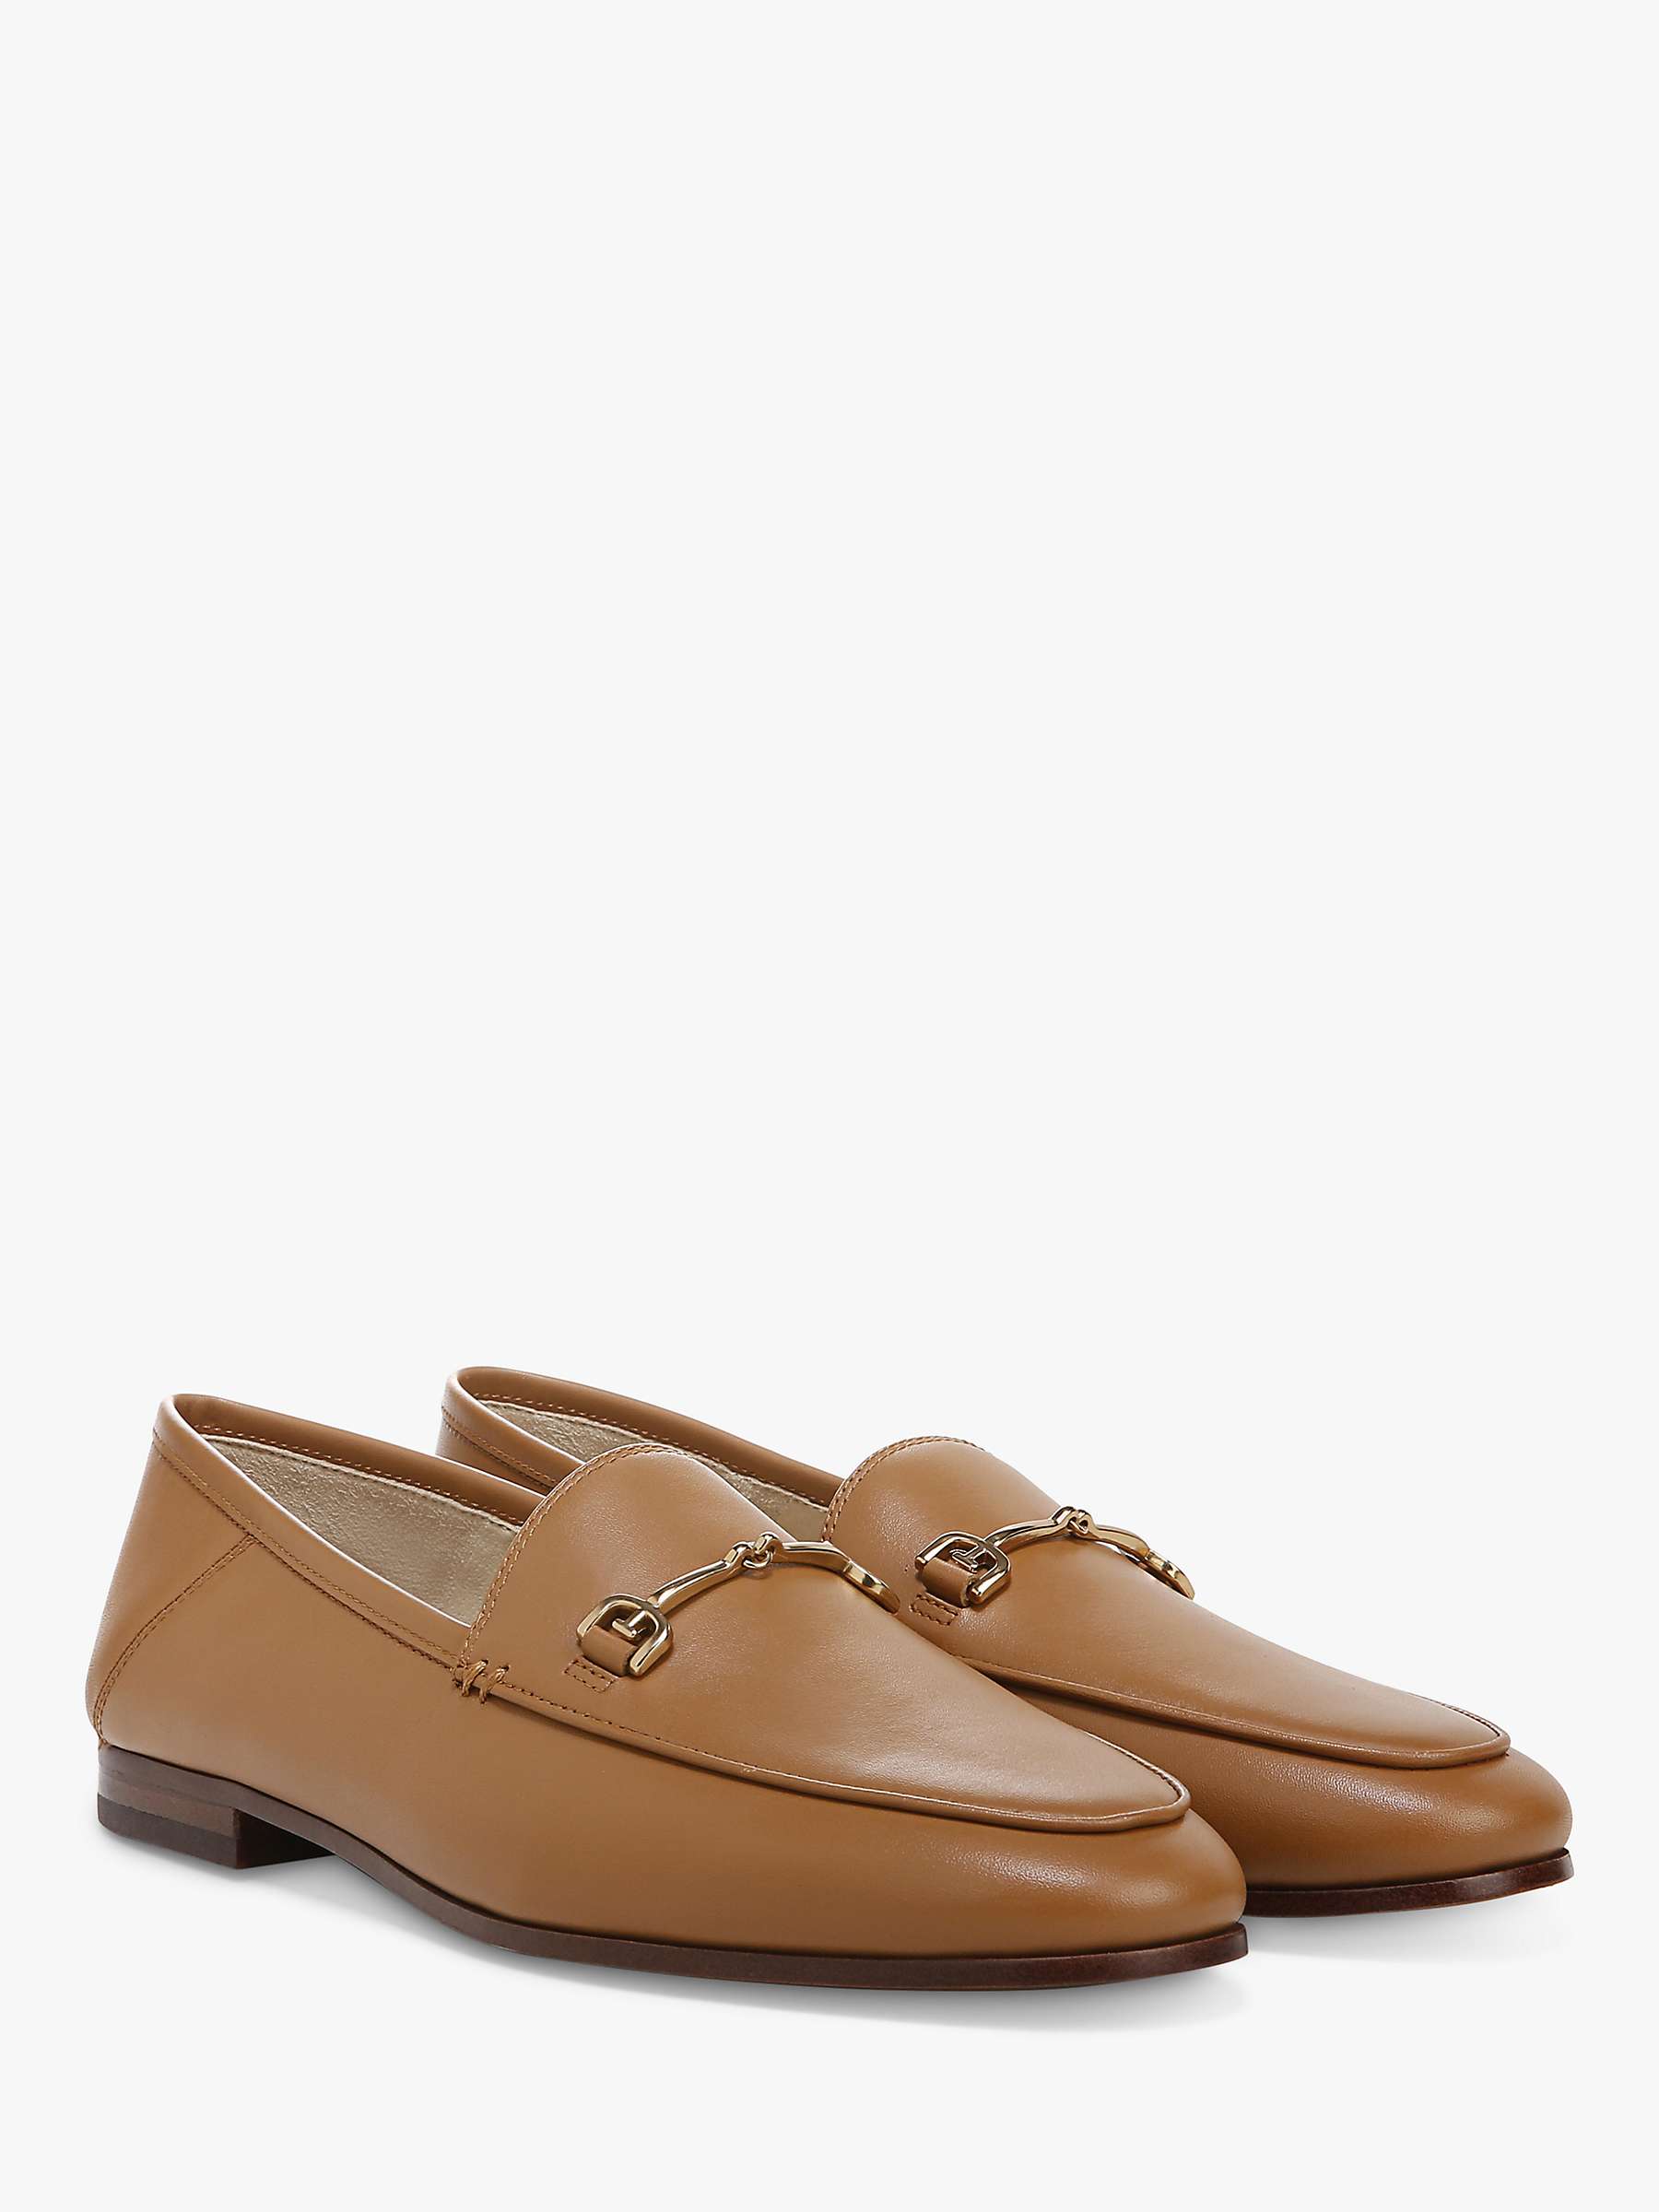 Buy Sam Edelman Loraine Leather Loafers Online at johnlewis.com